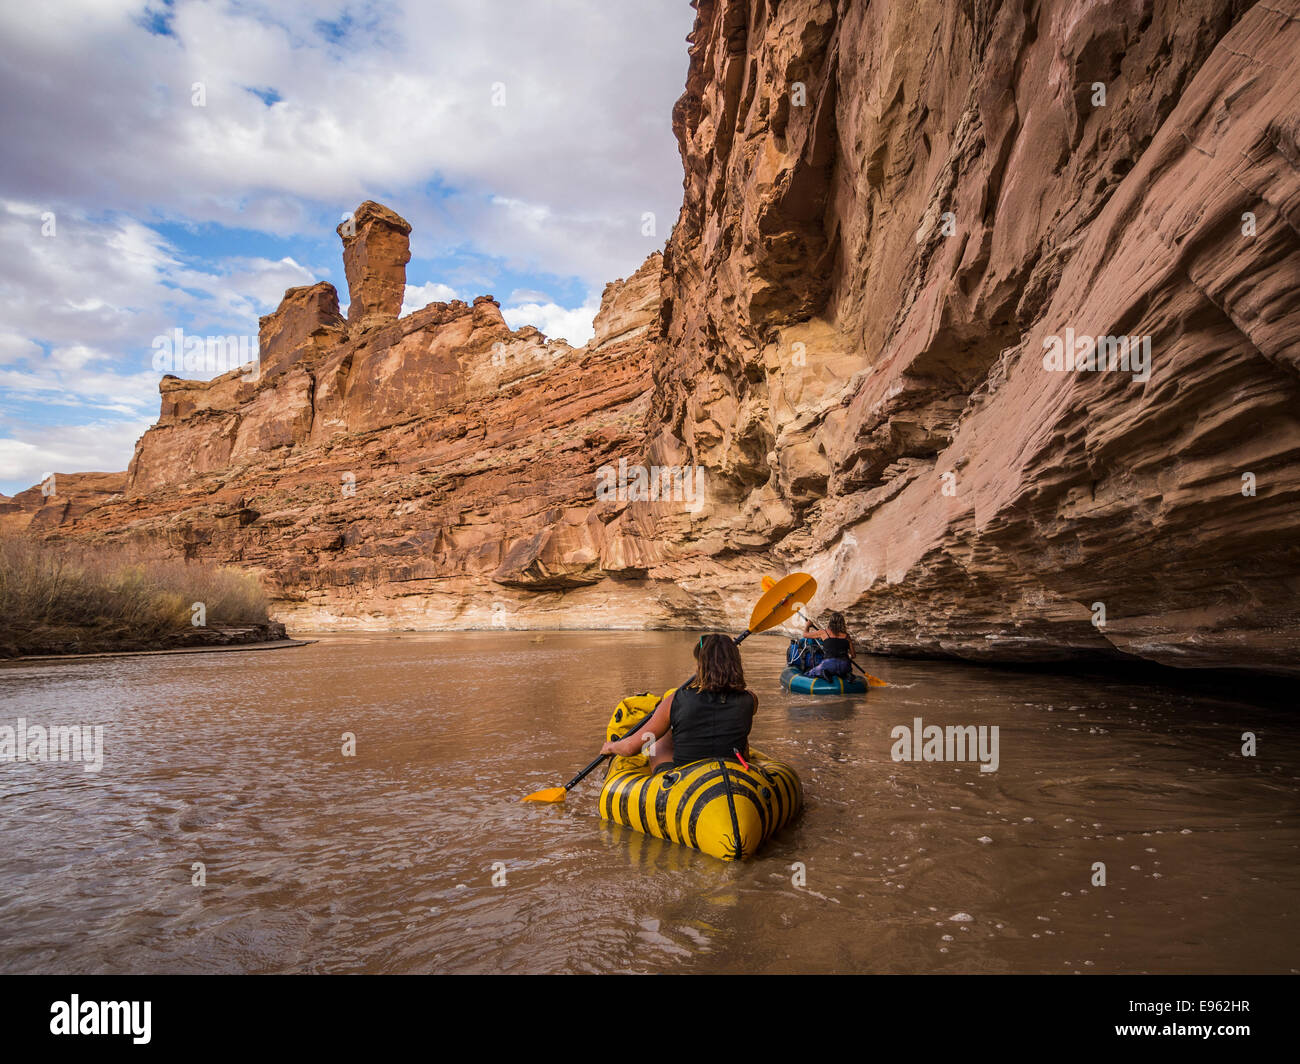 Natali Day and Suzy Loeffler pack rafting on the Dirty Devil river, Utah. Stock Photo